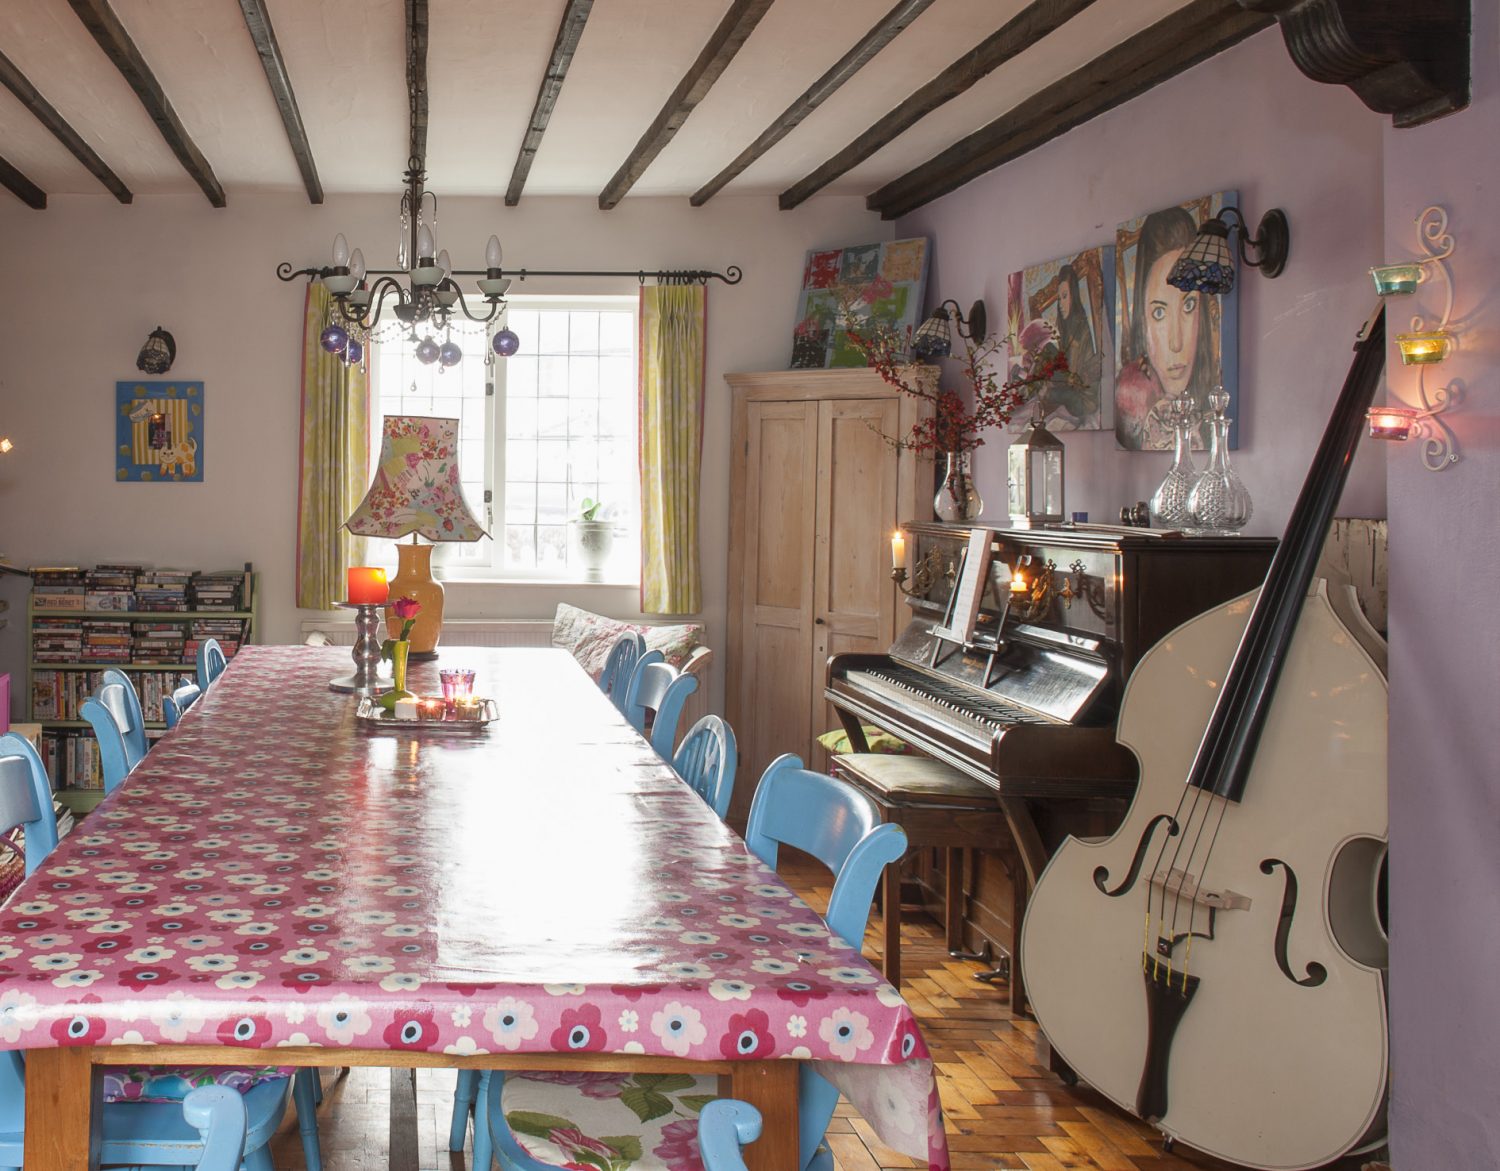 The spacious dining room is painted a strong lilac and everywhere there are witnesses to the family’s artistic and musical commitments